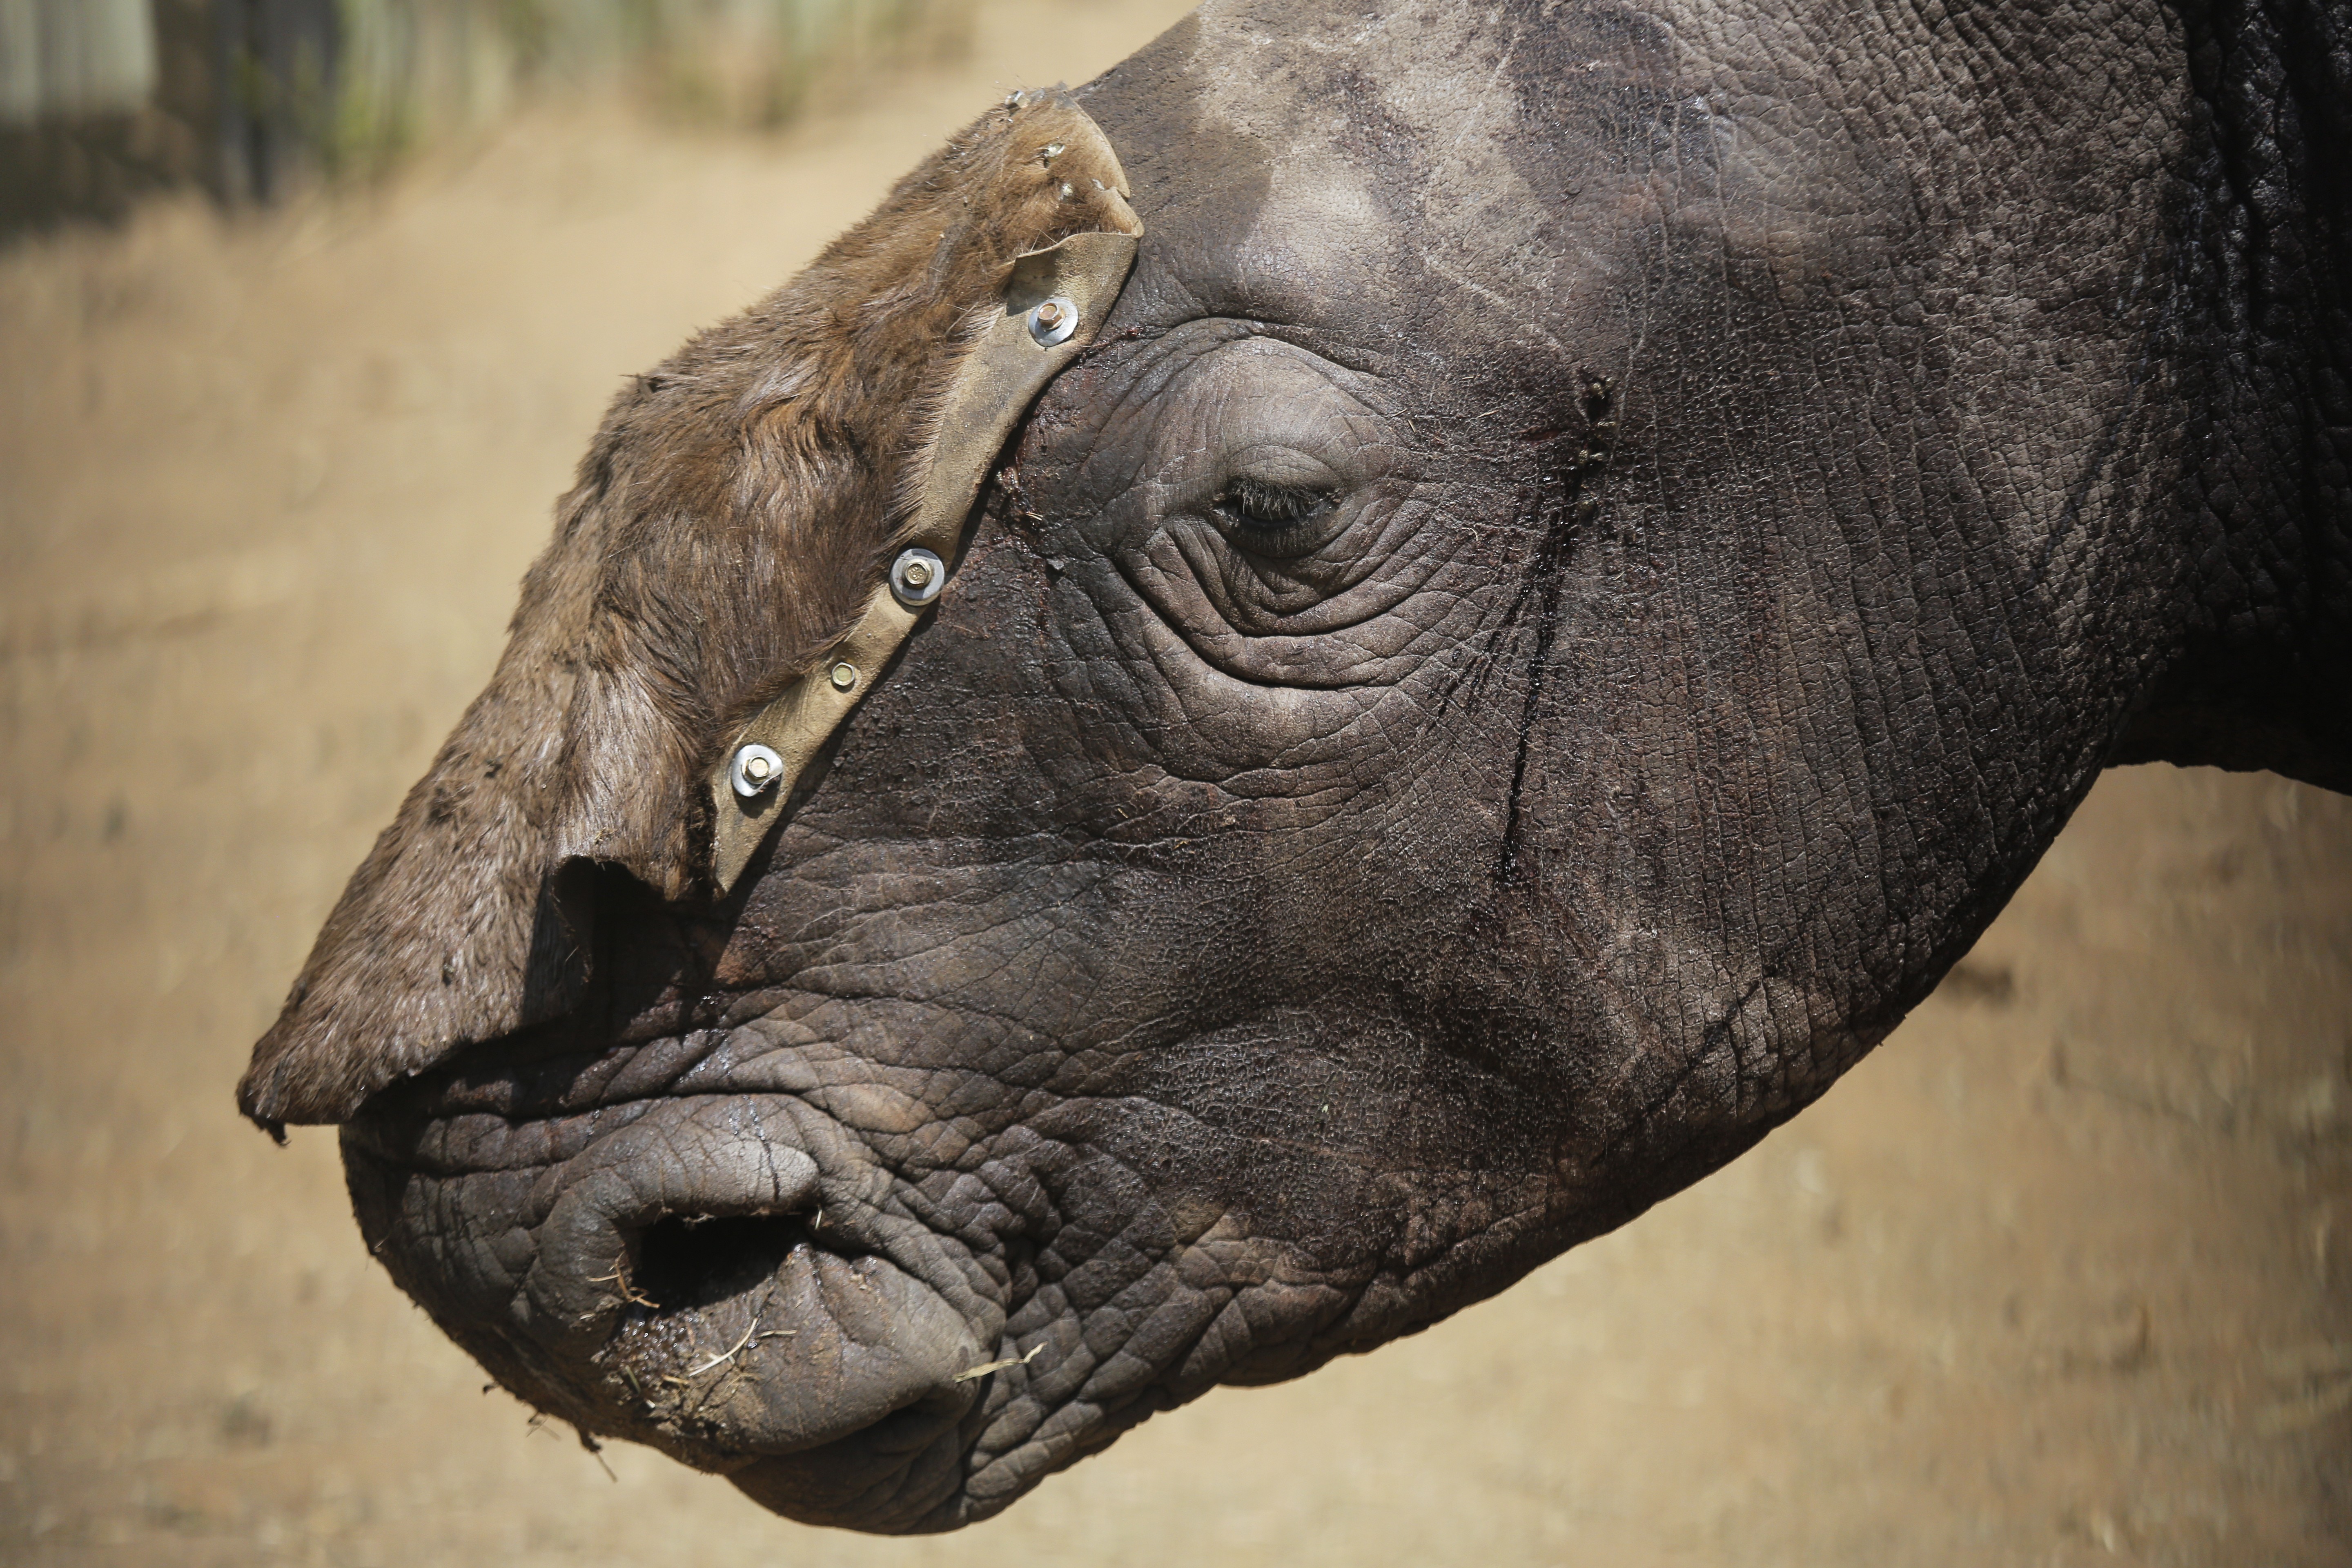 Three-year-old white rhino Wasinda has a temporary hide covering his open wounds, before being treated by Saving the Survivors vets at a private game farm in Clocolan, South Africa, in September 2017. The vast majority of rhino horn poached in South Africa is for the market in China and other East Asian countries. Photo: EPA-EFE